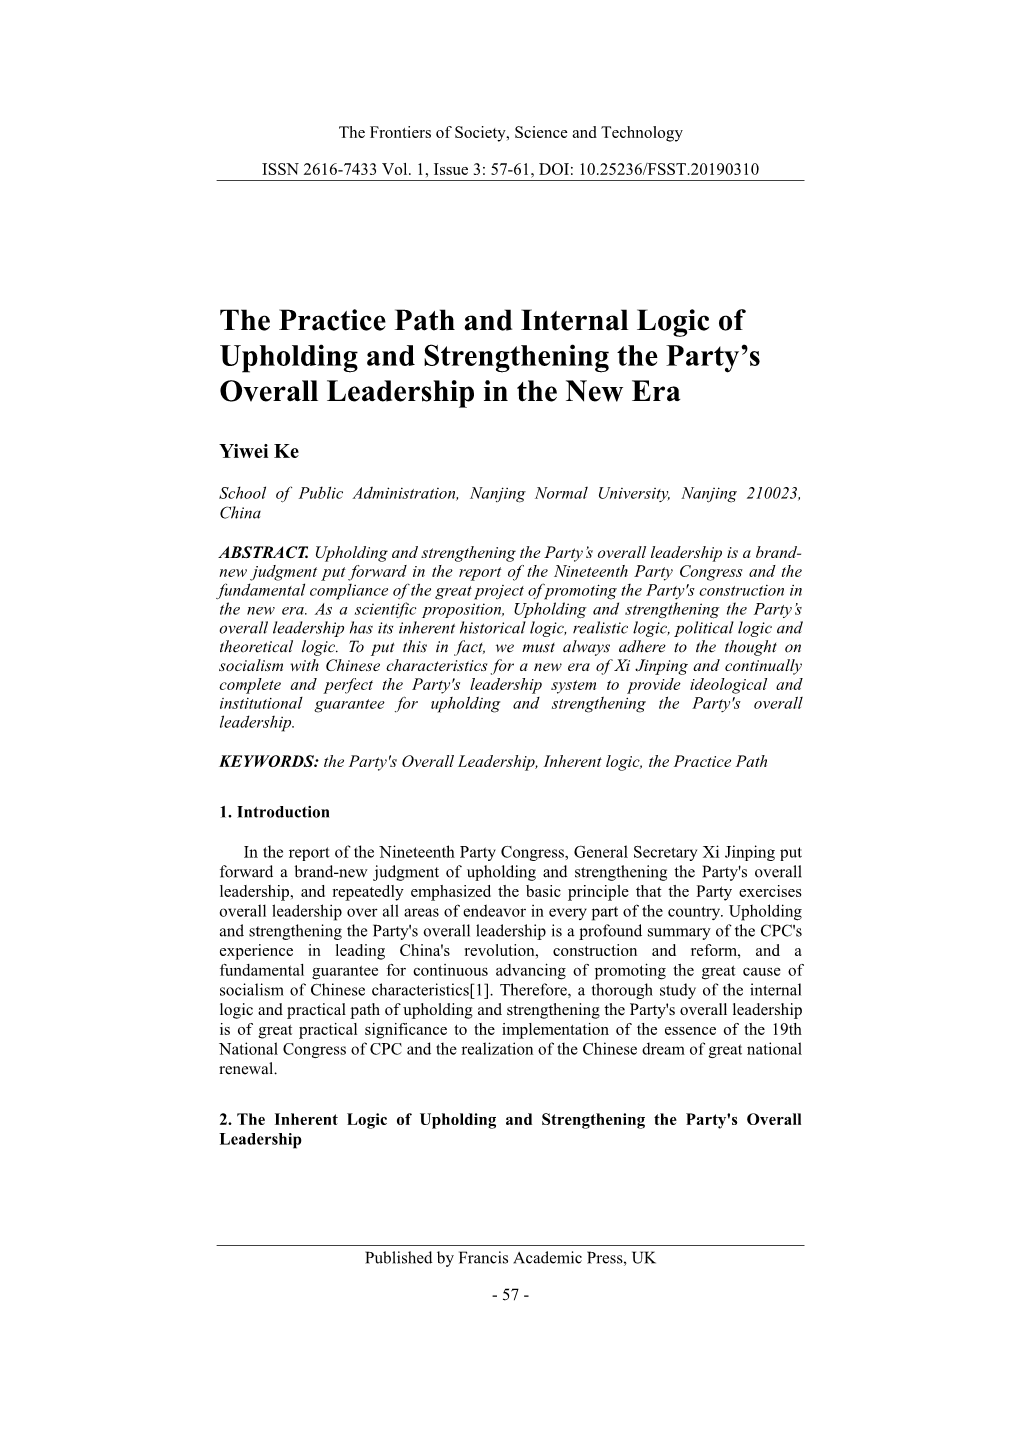 The Practice Path and Internal Logic of Upholding and Strengthening the Party’S Overall Leadership in the New Era